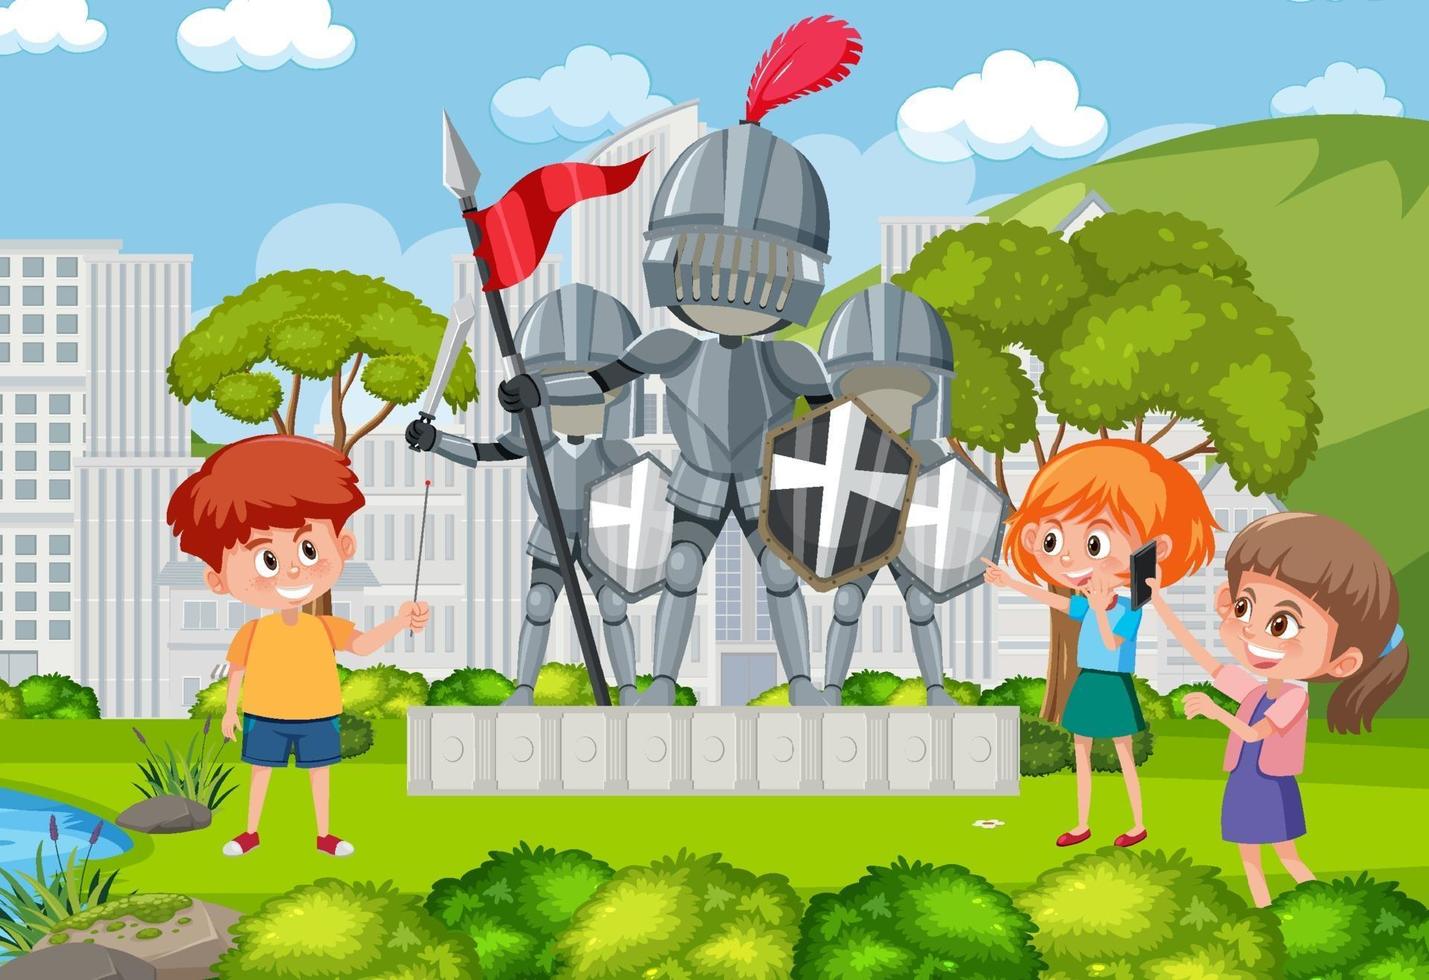 Kids at the park with knight statue vector